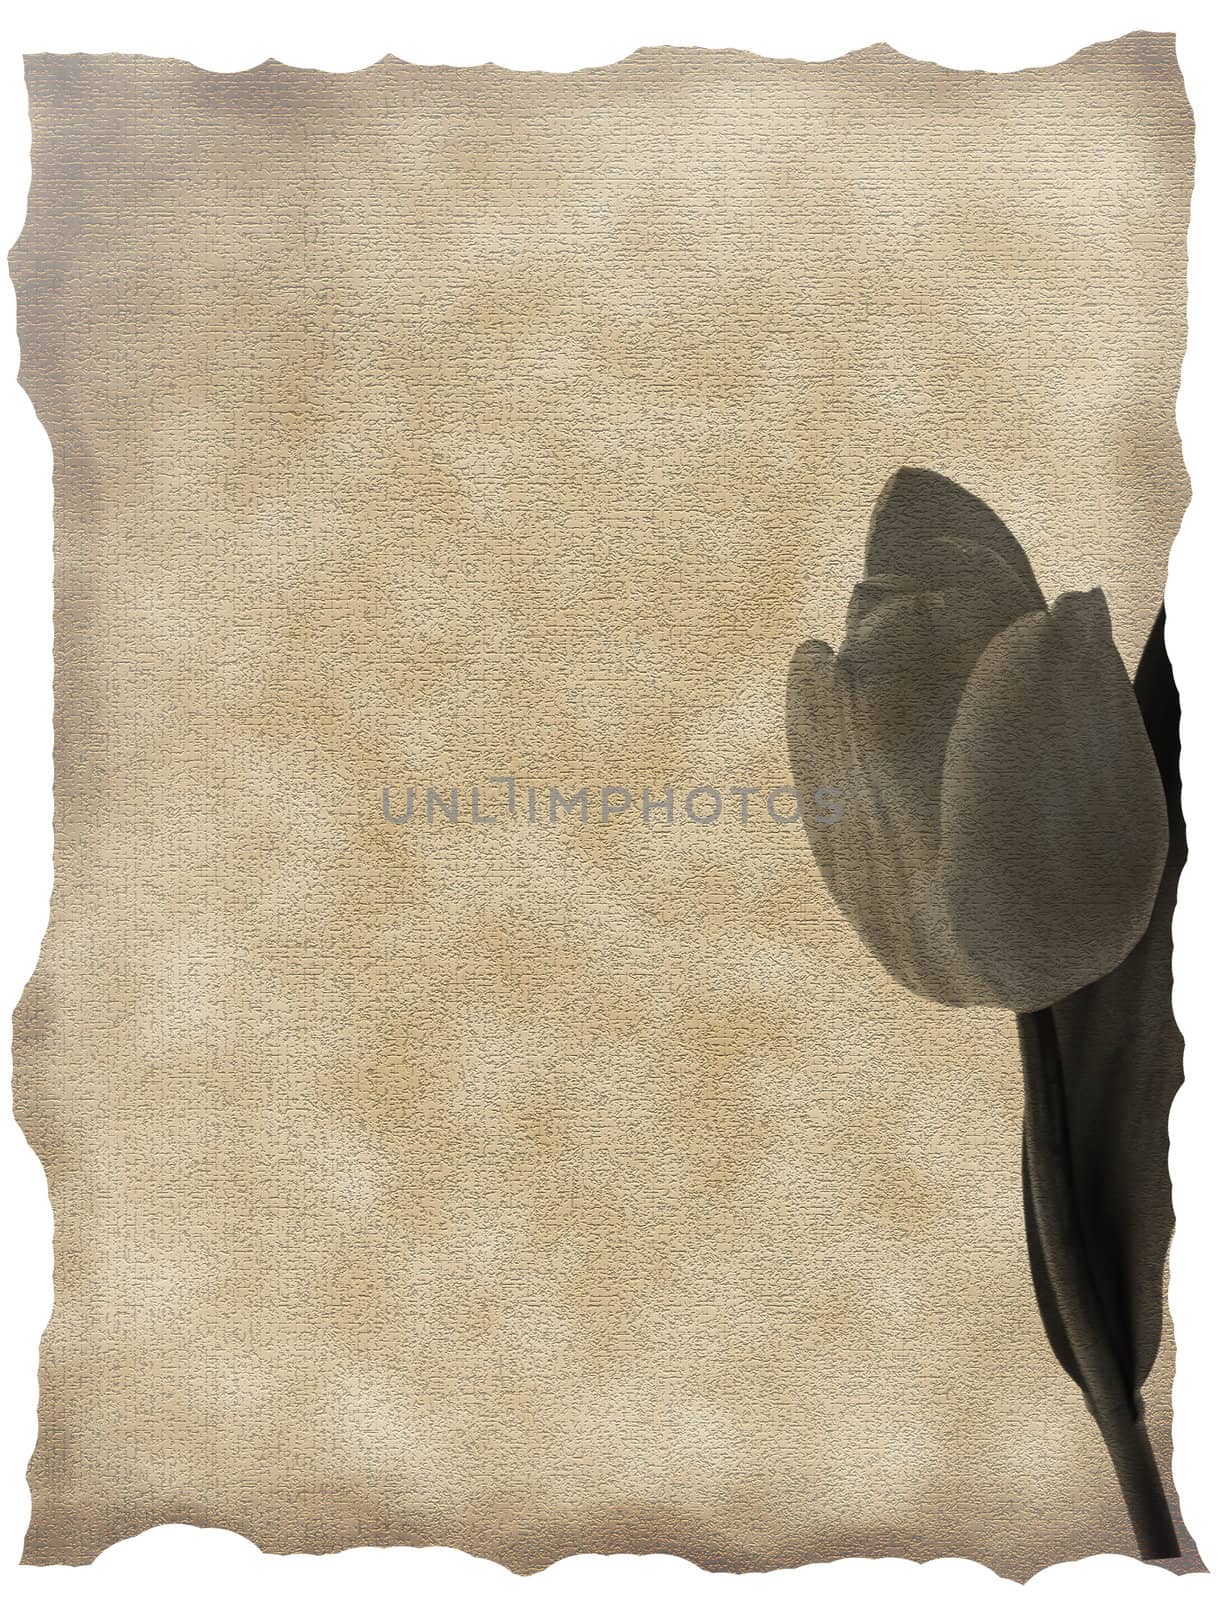 textured old paper background with tulips  by rufous